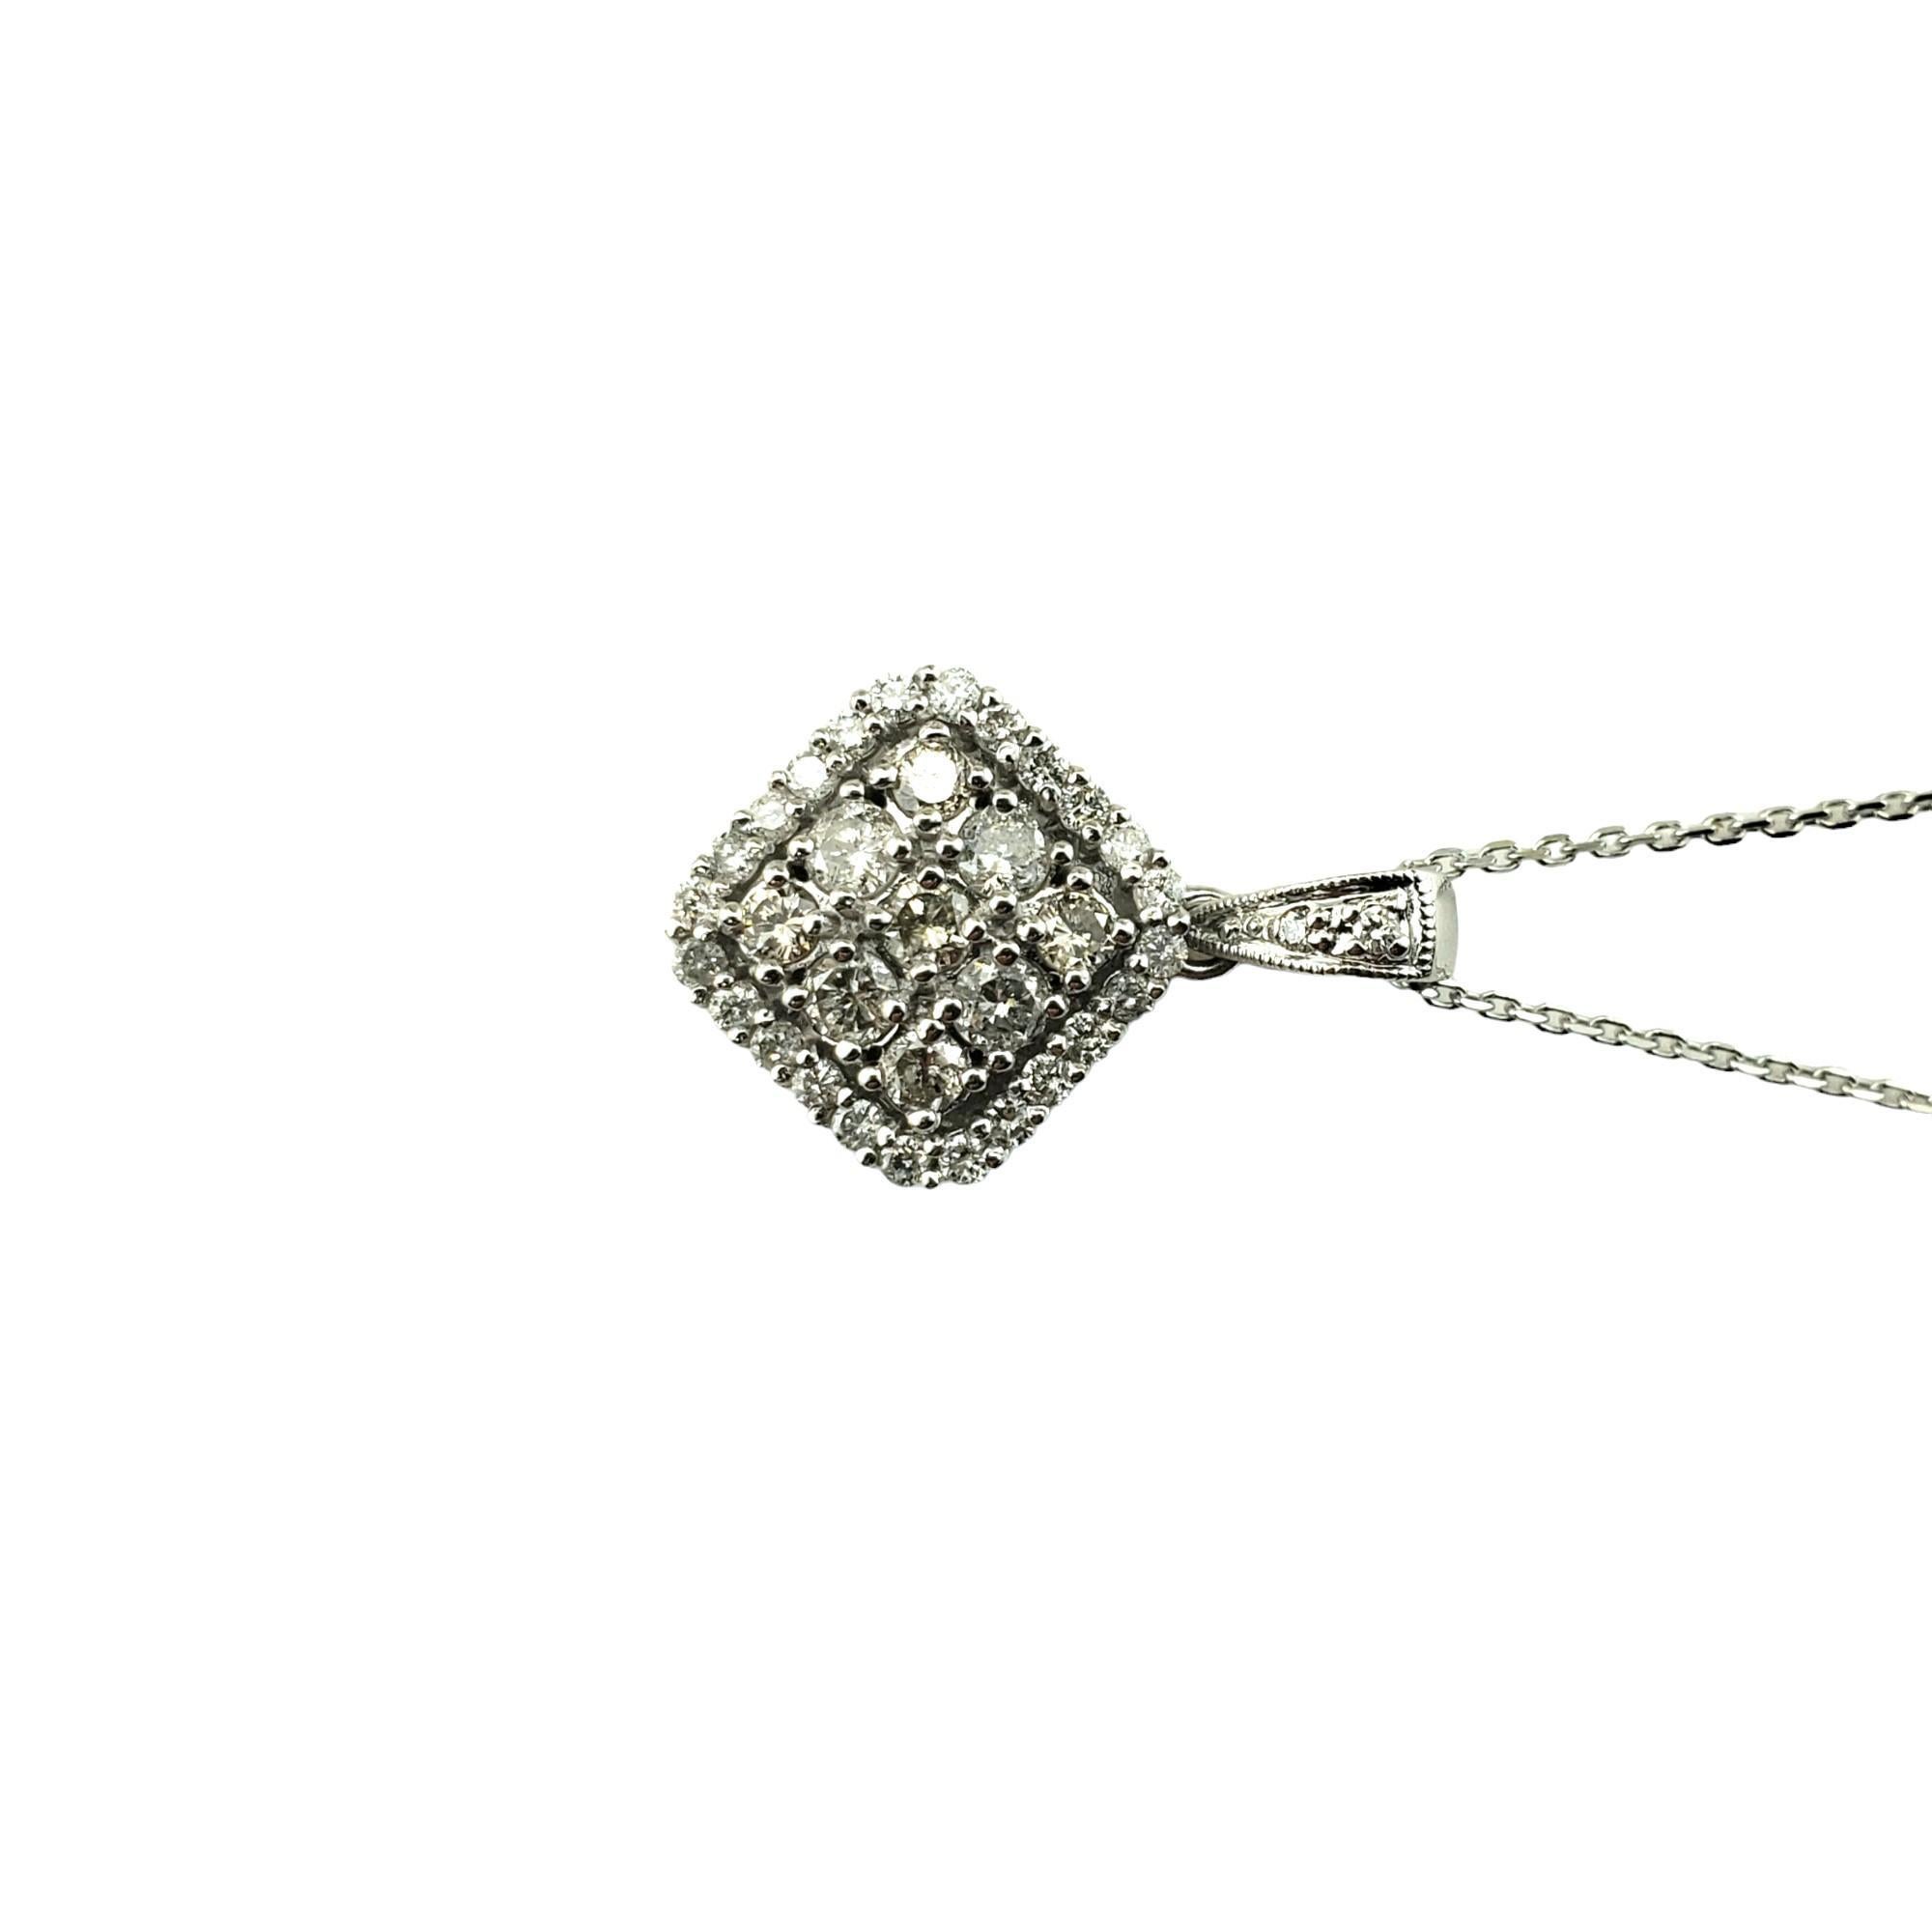 Vintage 14 Karat White Gold Diamond Pendant Necklace-

This sparkling pendant features 35 round brilliant cut diamonds set in classic 14K white gold.  Suspends from a classic cable necklace.

Approximate total diamond weight:  .50 ct.

Diamond